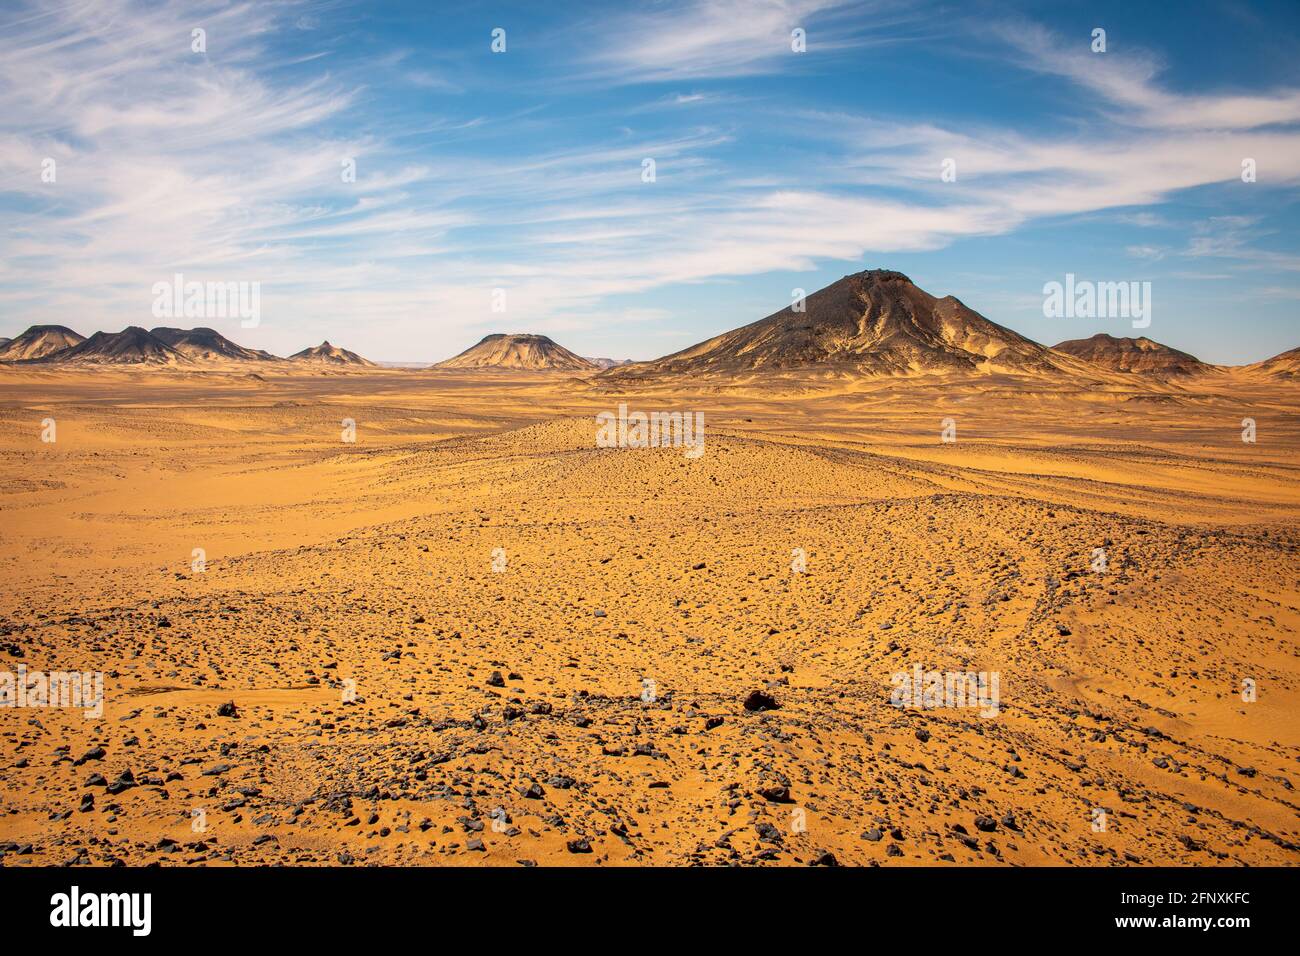 Interesting clouds and blue sky above the Black desert, Egypt. Stock Photo